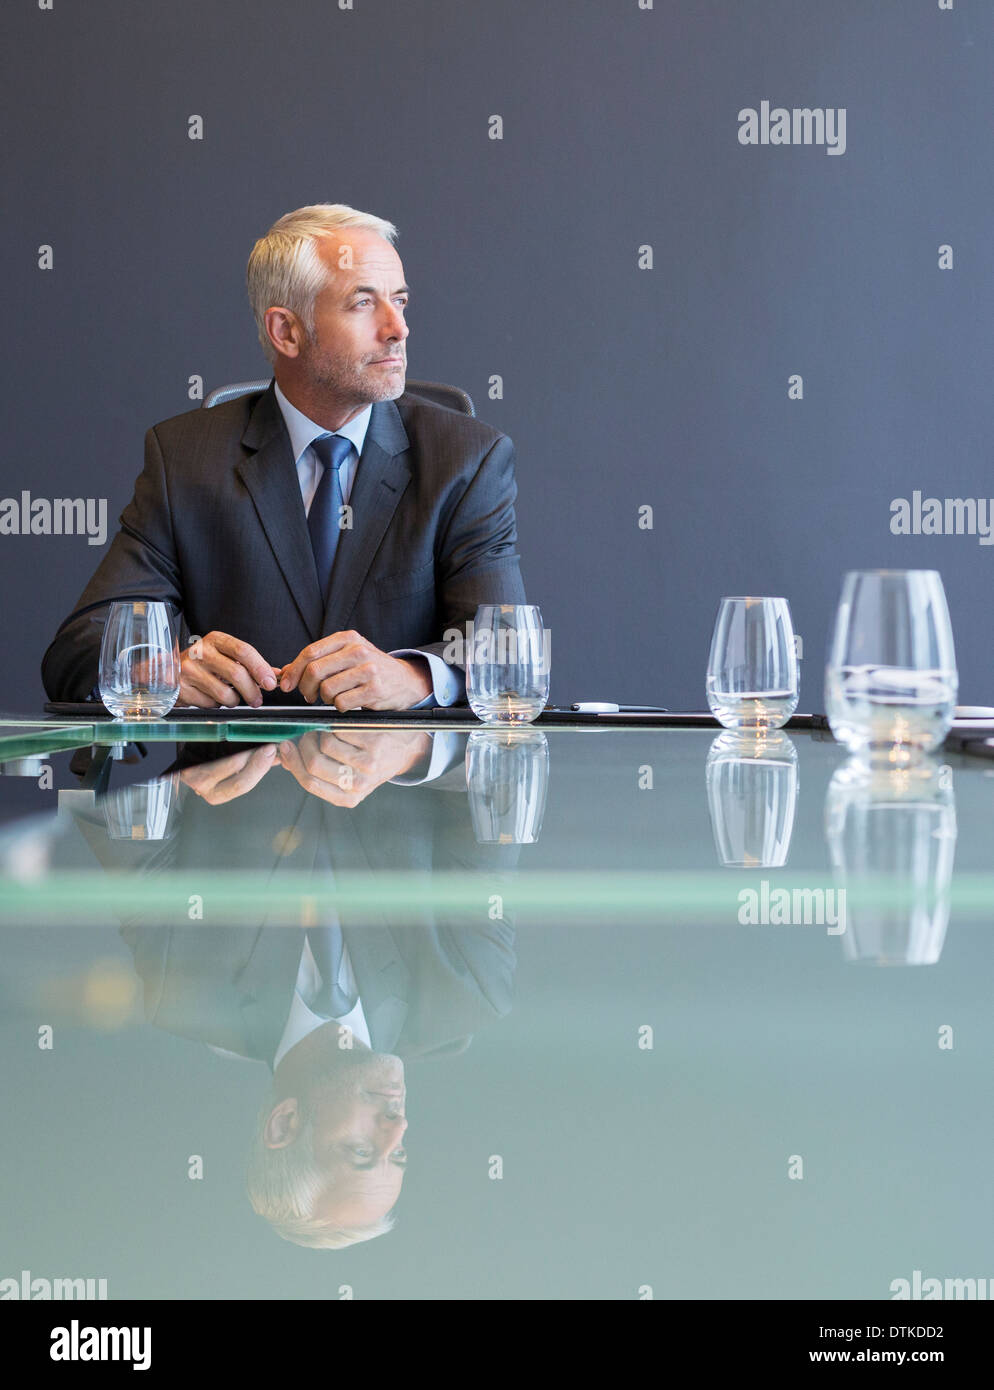 Businessman sitting at conference table Banque D'Images